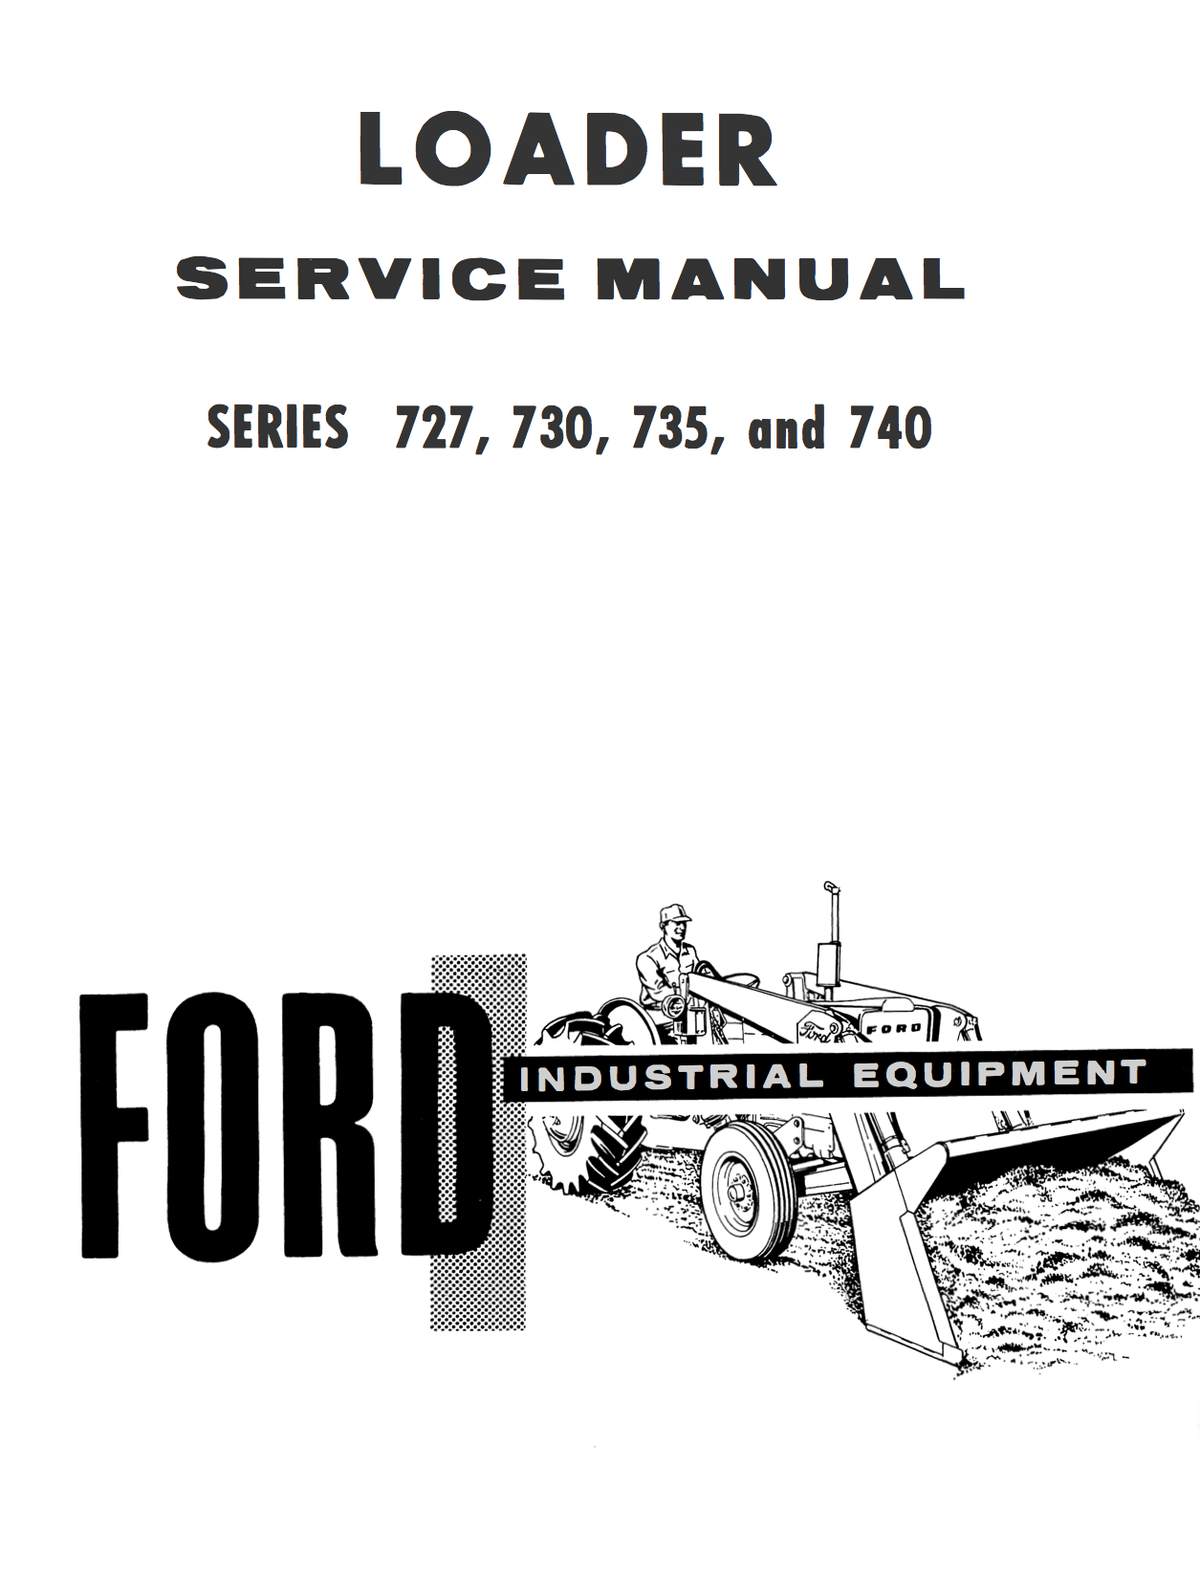 Ford Industrial 727, 730, 735, and 740 Series Loader Service Manual - Ag Manuals - A Provider of Digital Farm Manuals - 1